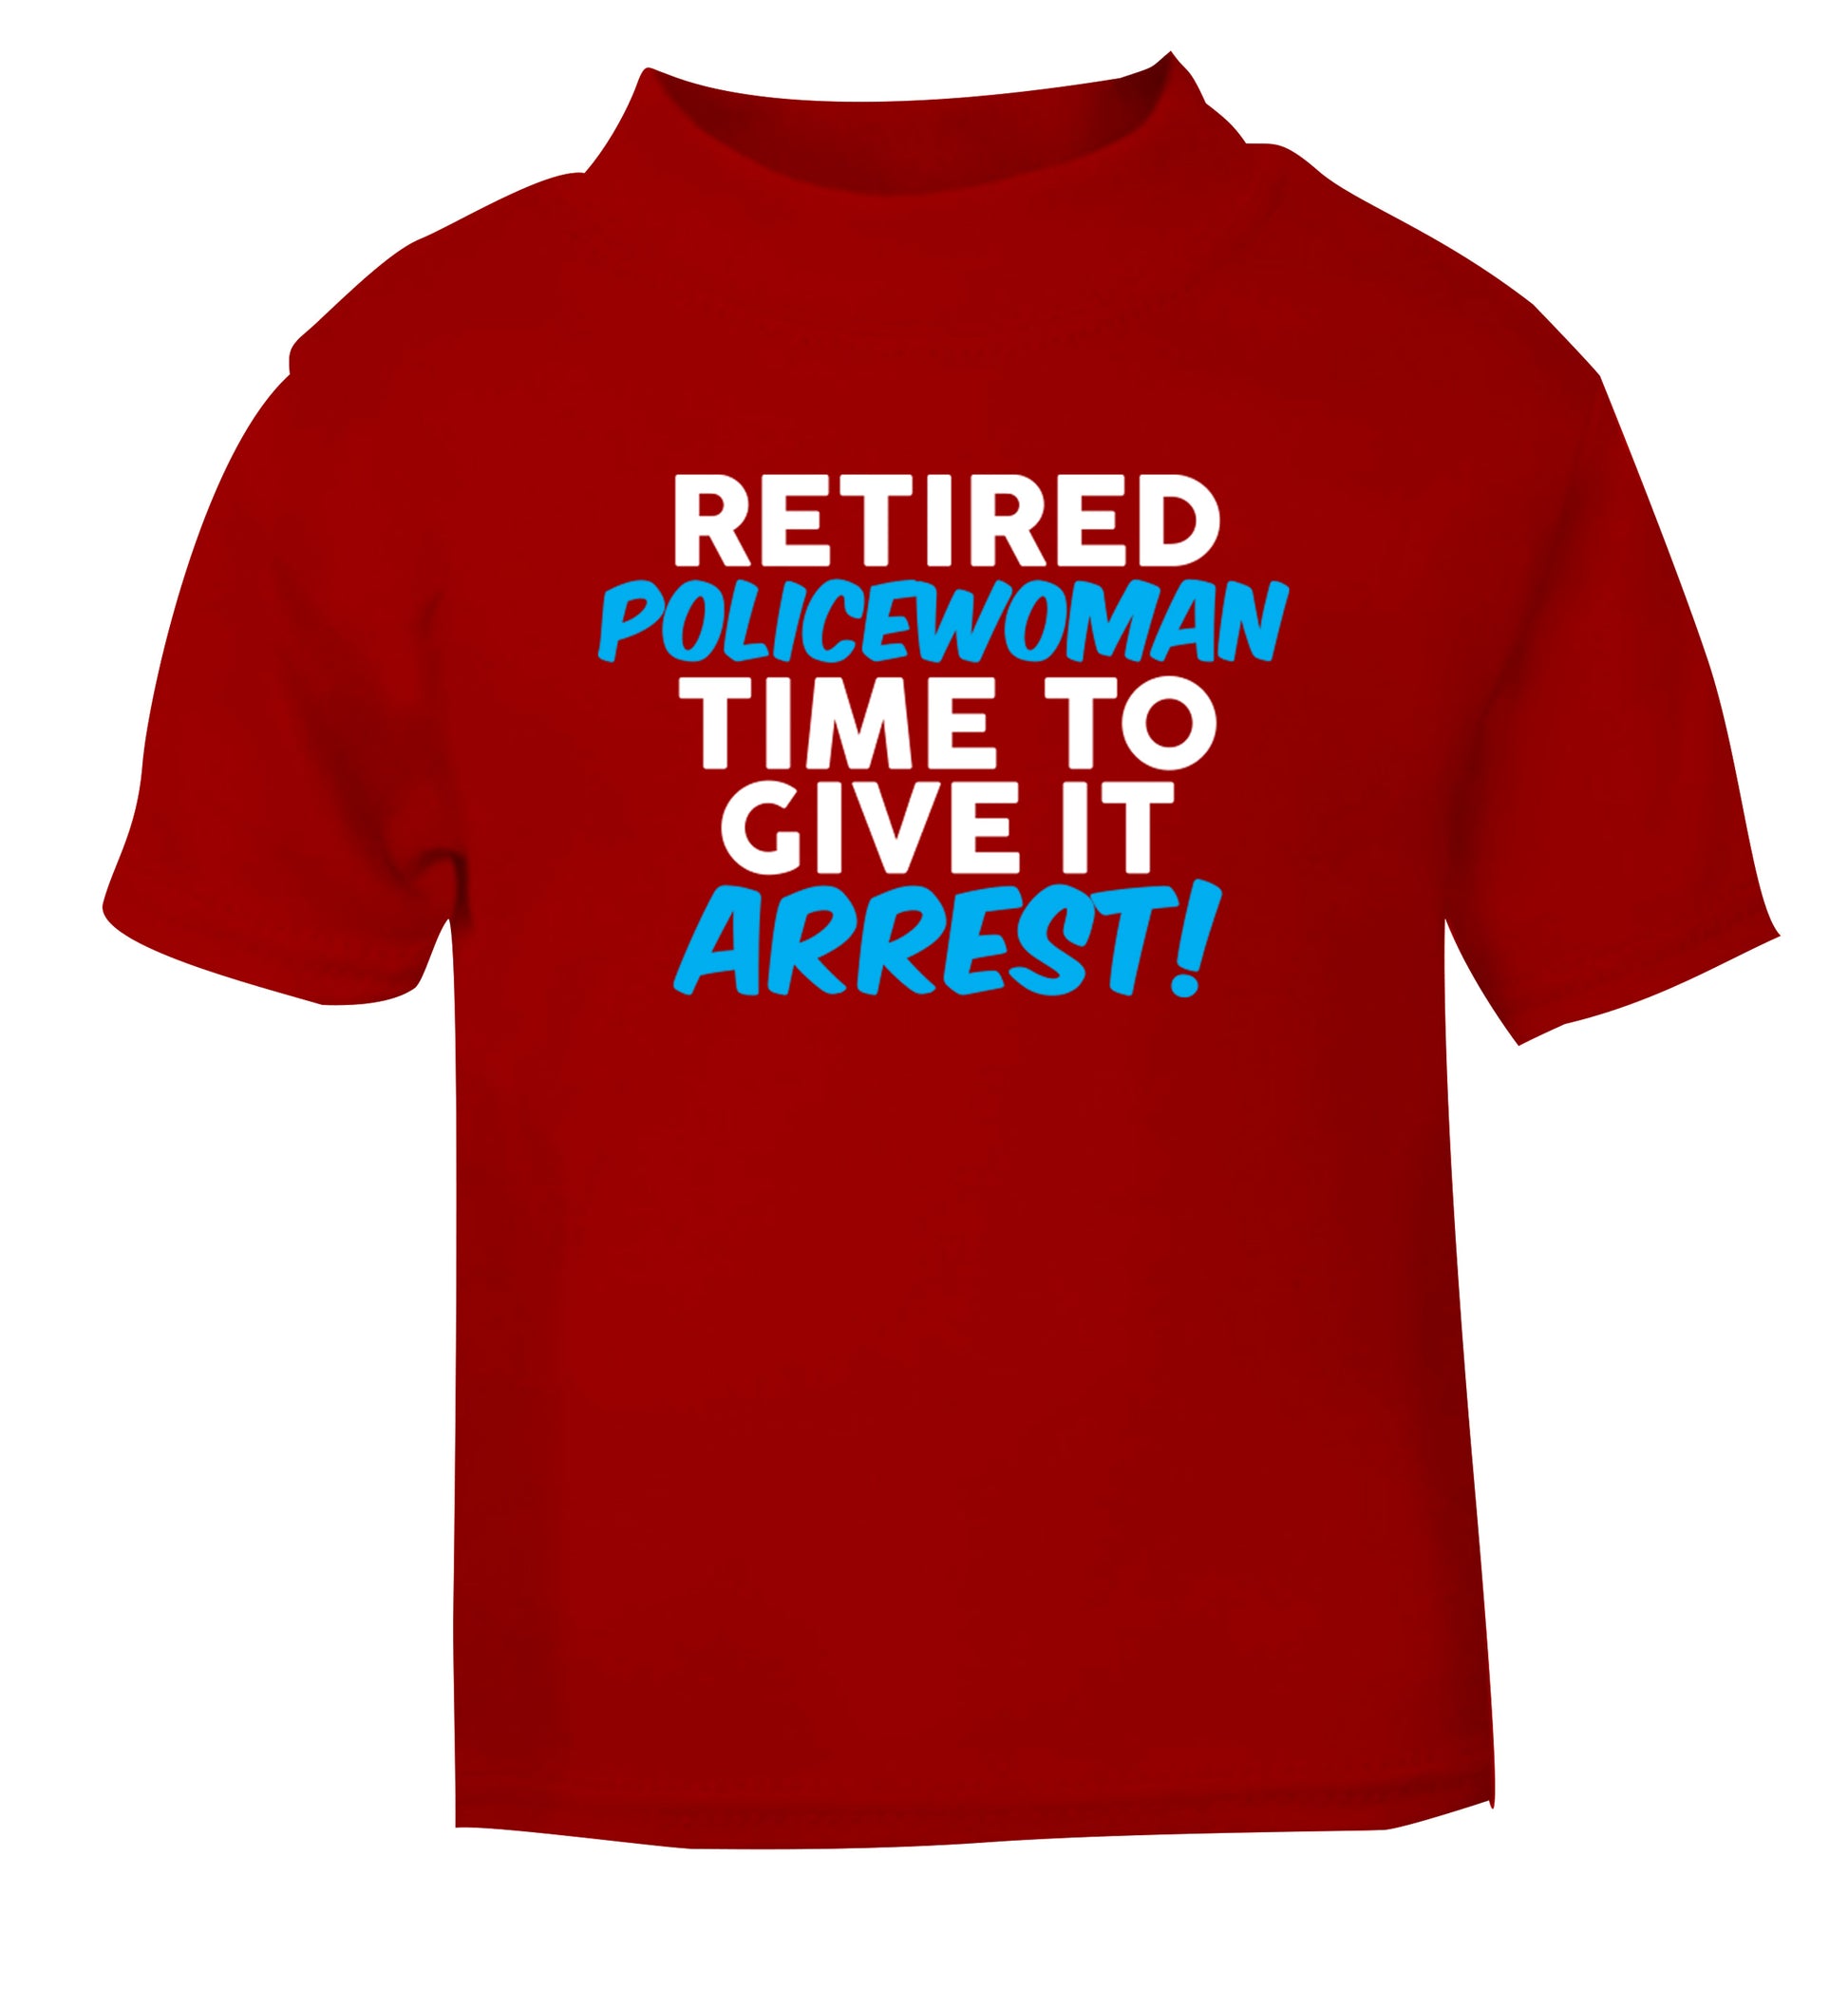 Retired policewoman time to give it arrest red Baby Toddler Tshirt 2 Years